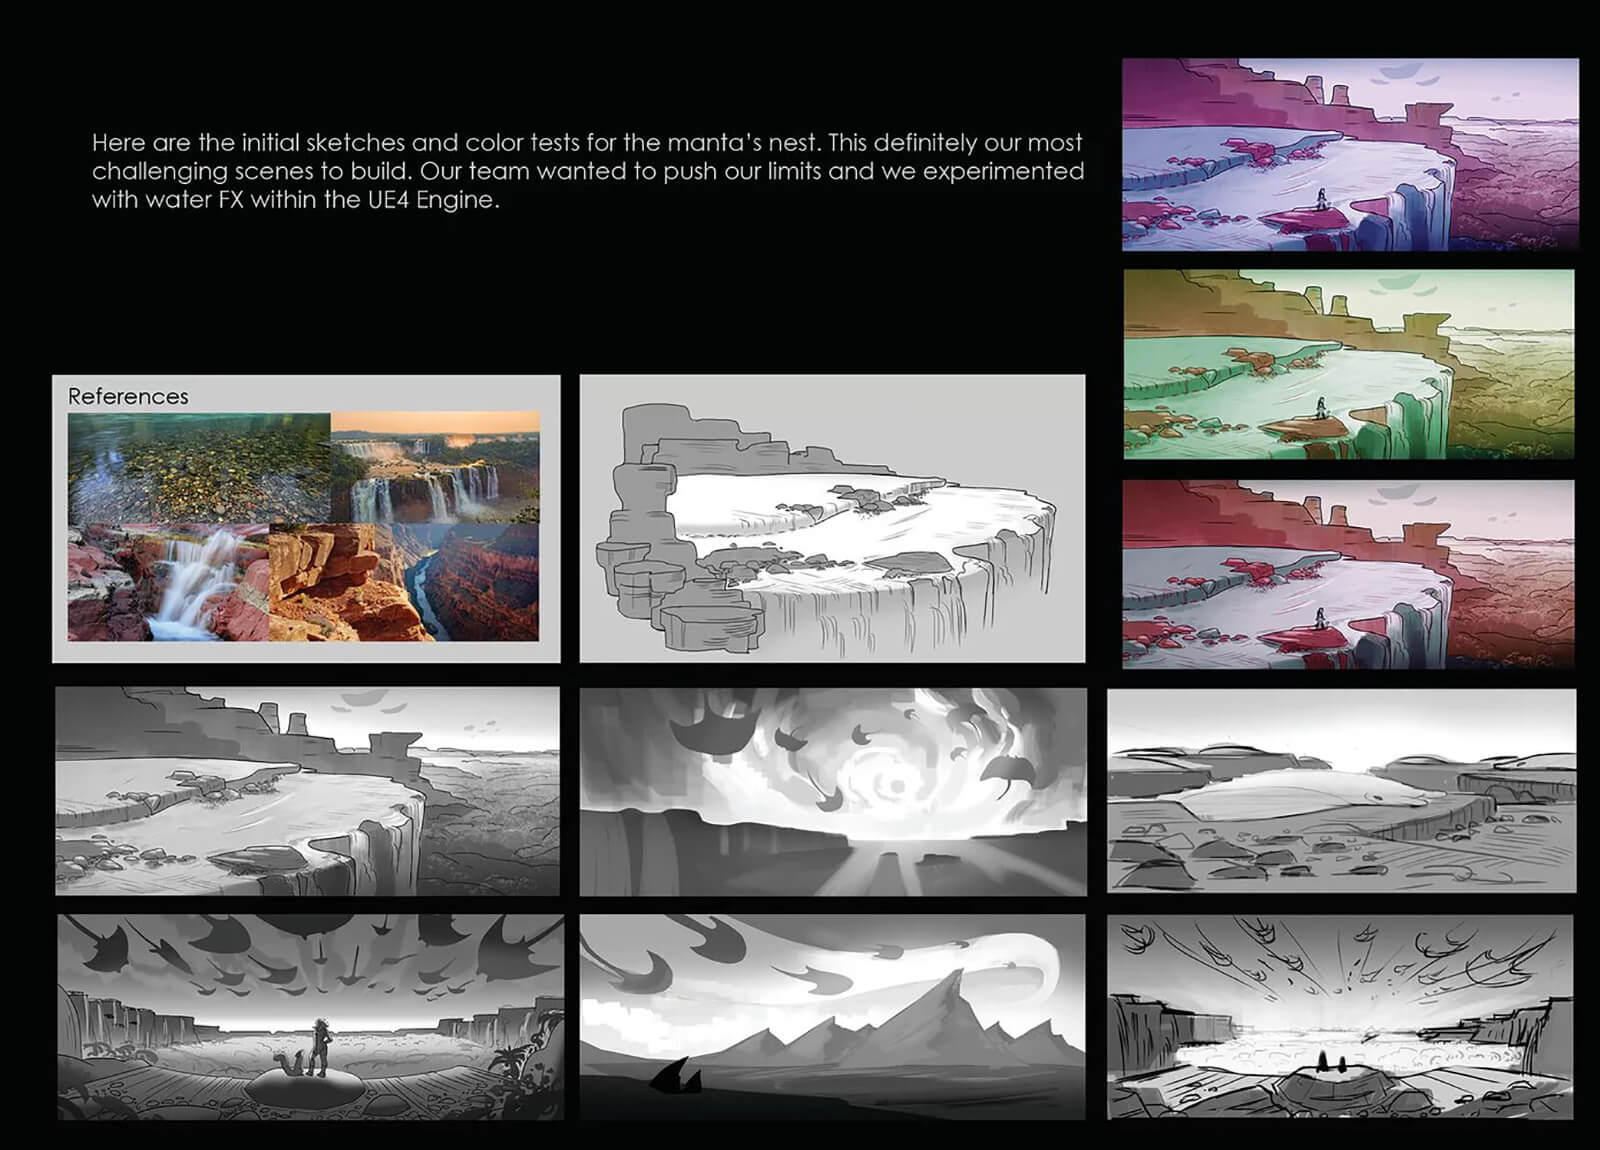 Initial sketches and color tests for the manta’s nest, located atop of a waterfall on an alien planet.